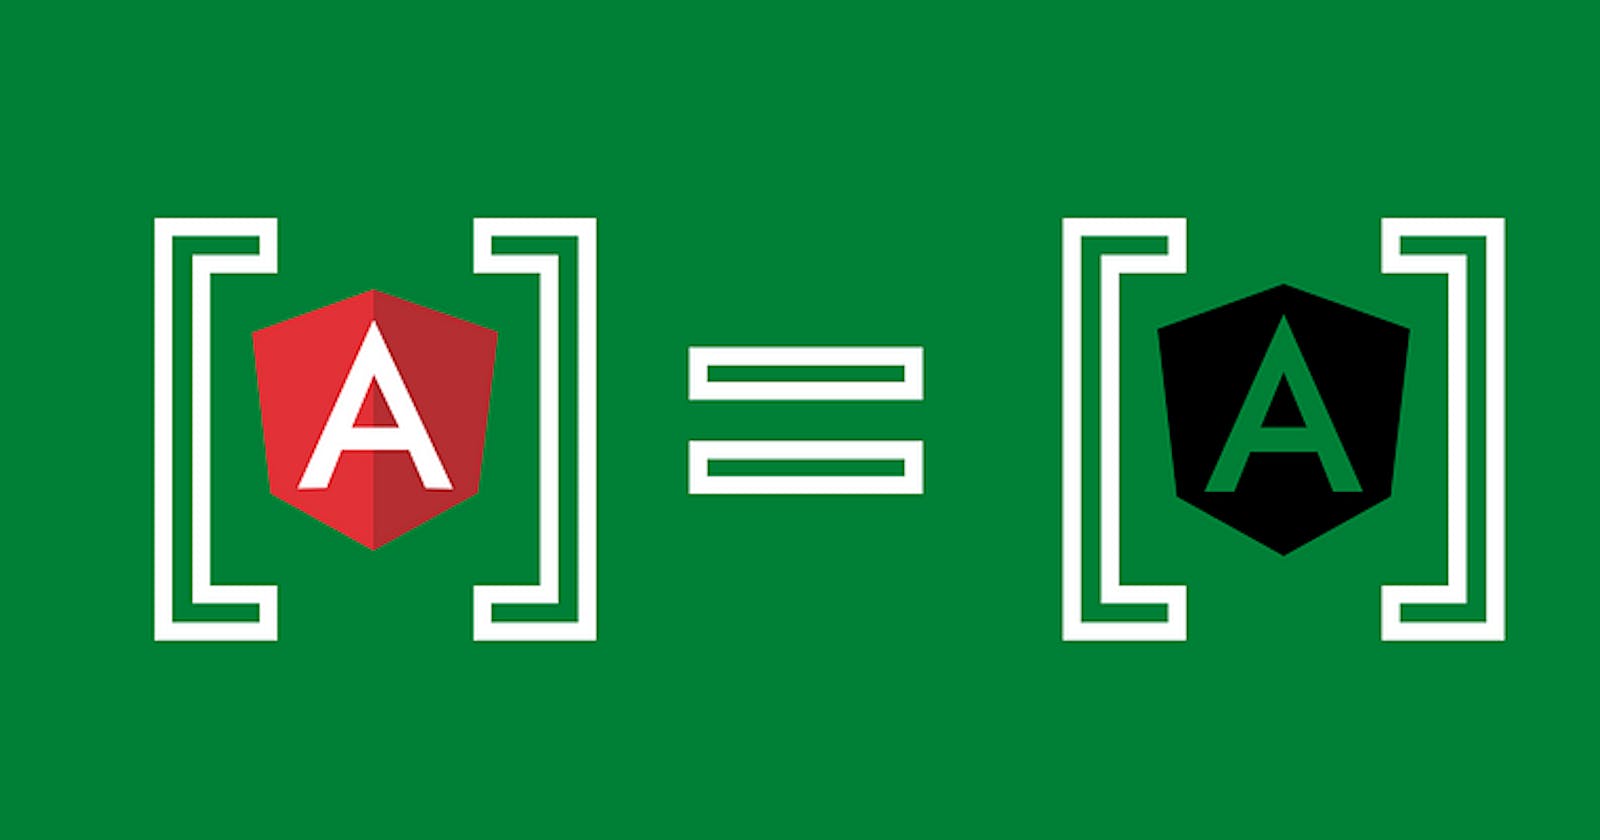 Property Binding in Angular Explained